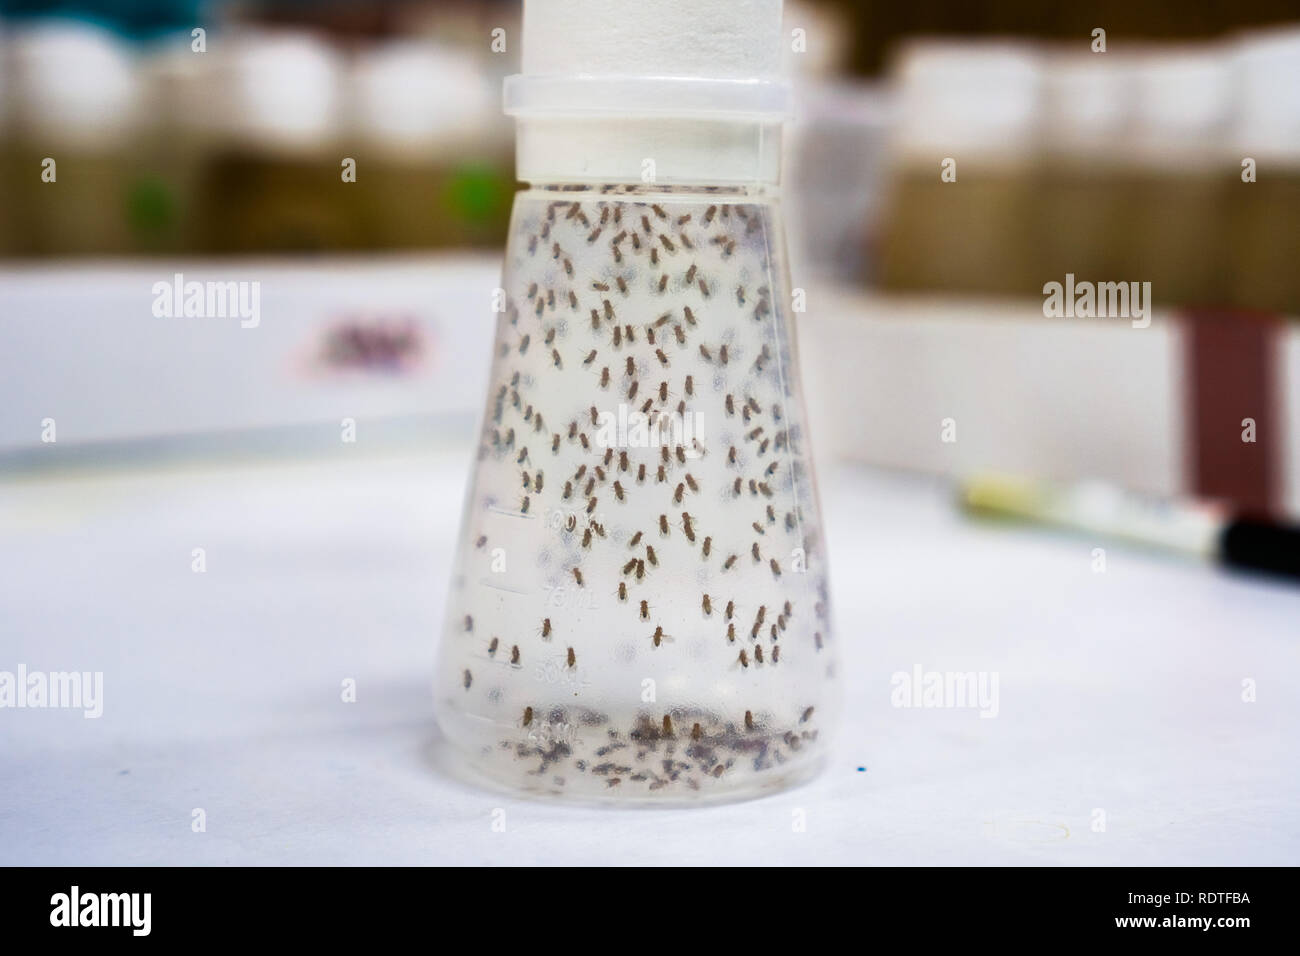 Vial containing Fruit Flies; the Fruit Fly (Drosophila melanogaster) continues to be widely used for biological research in genetics, physiology, micr Stock Photo